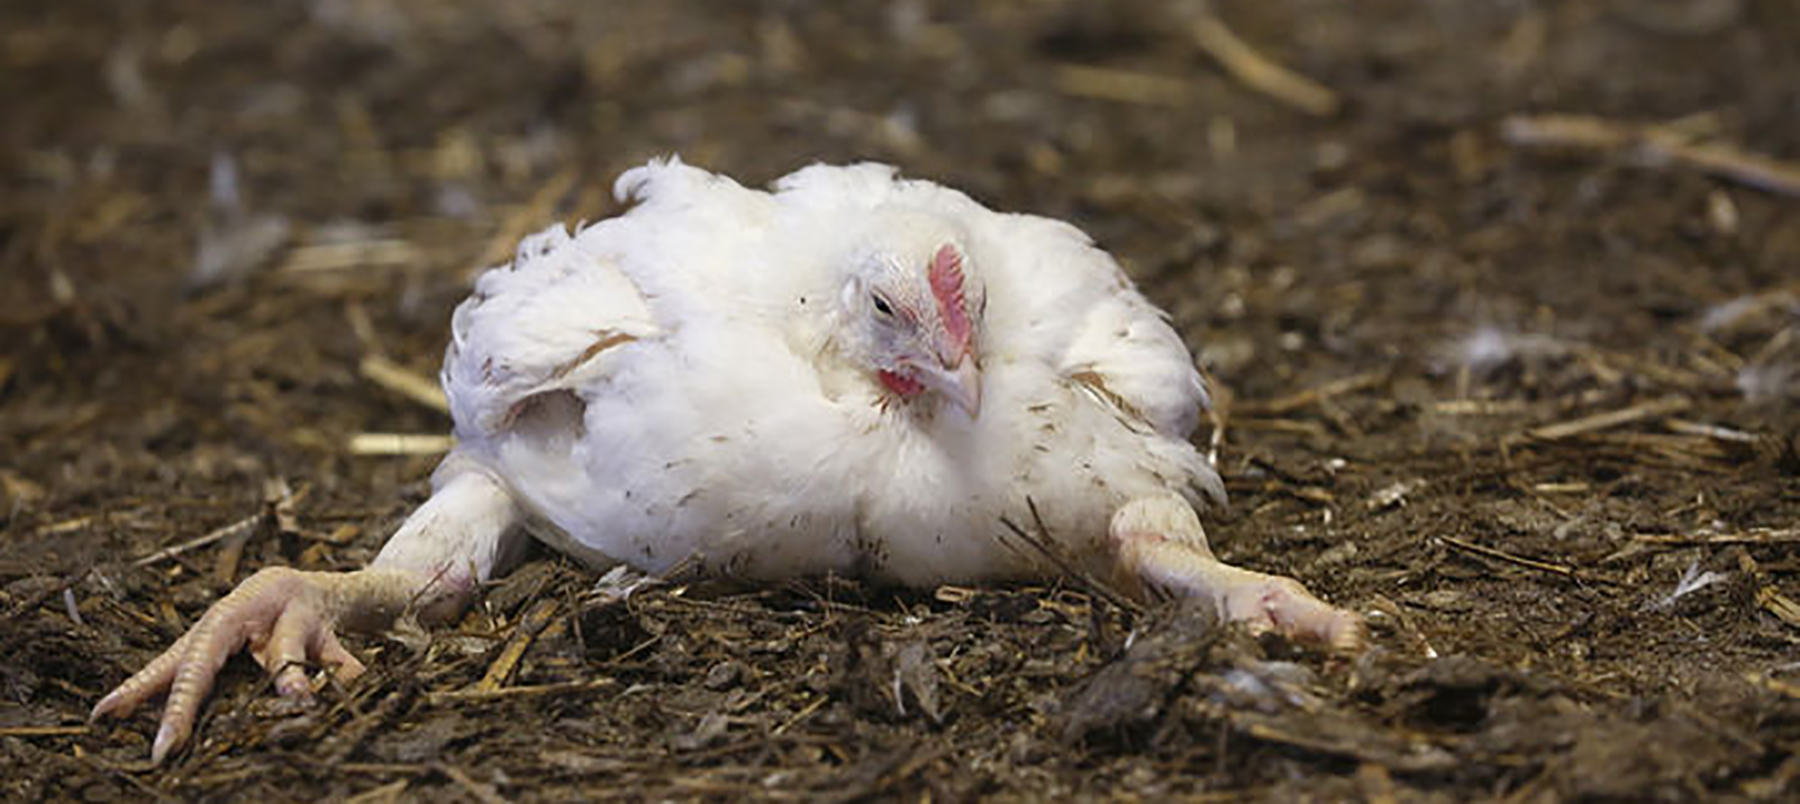 Animal Welfare at Winchester: calling for better welfare conditions for meat chickens - image of suffering chicken